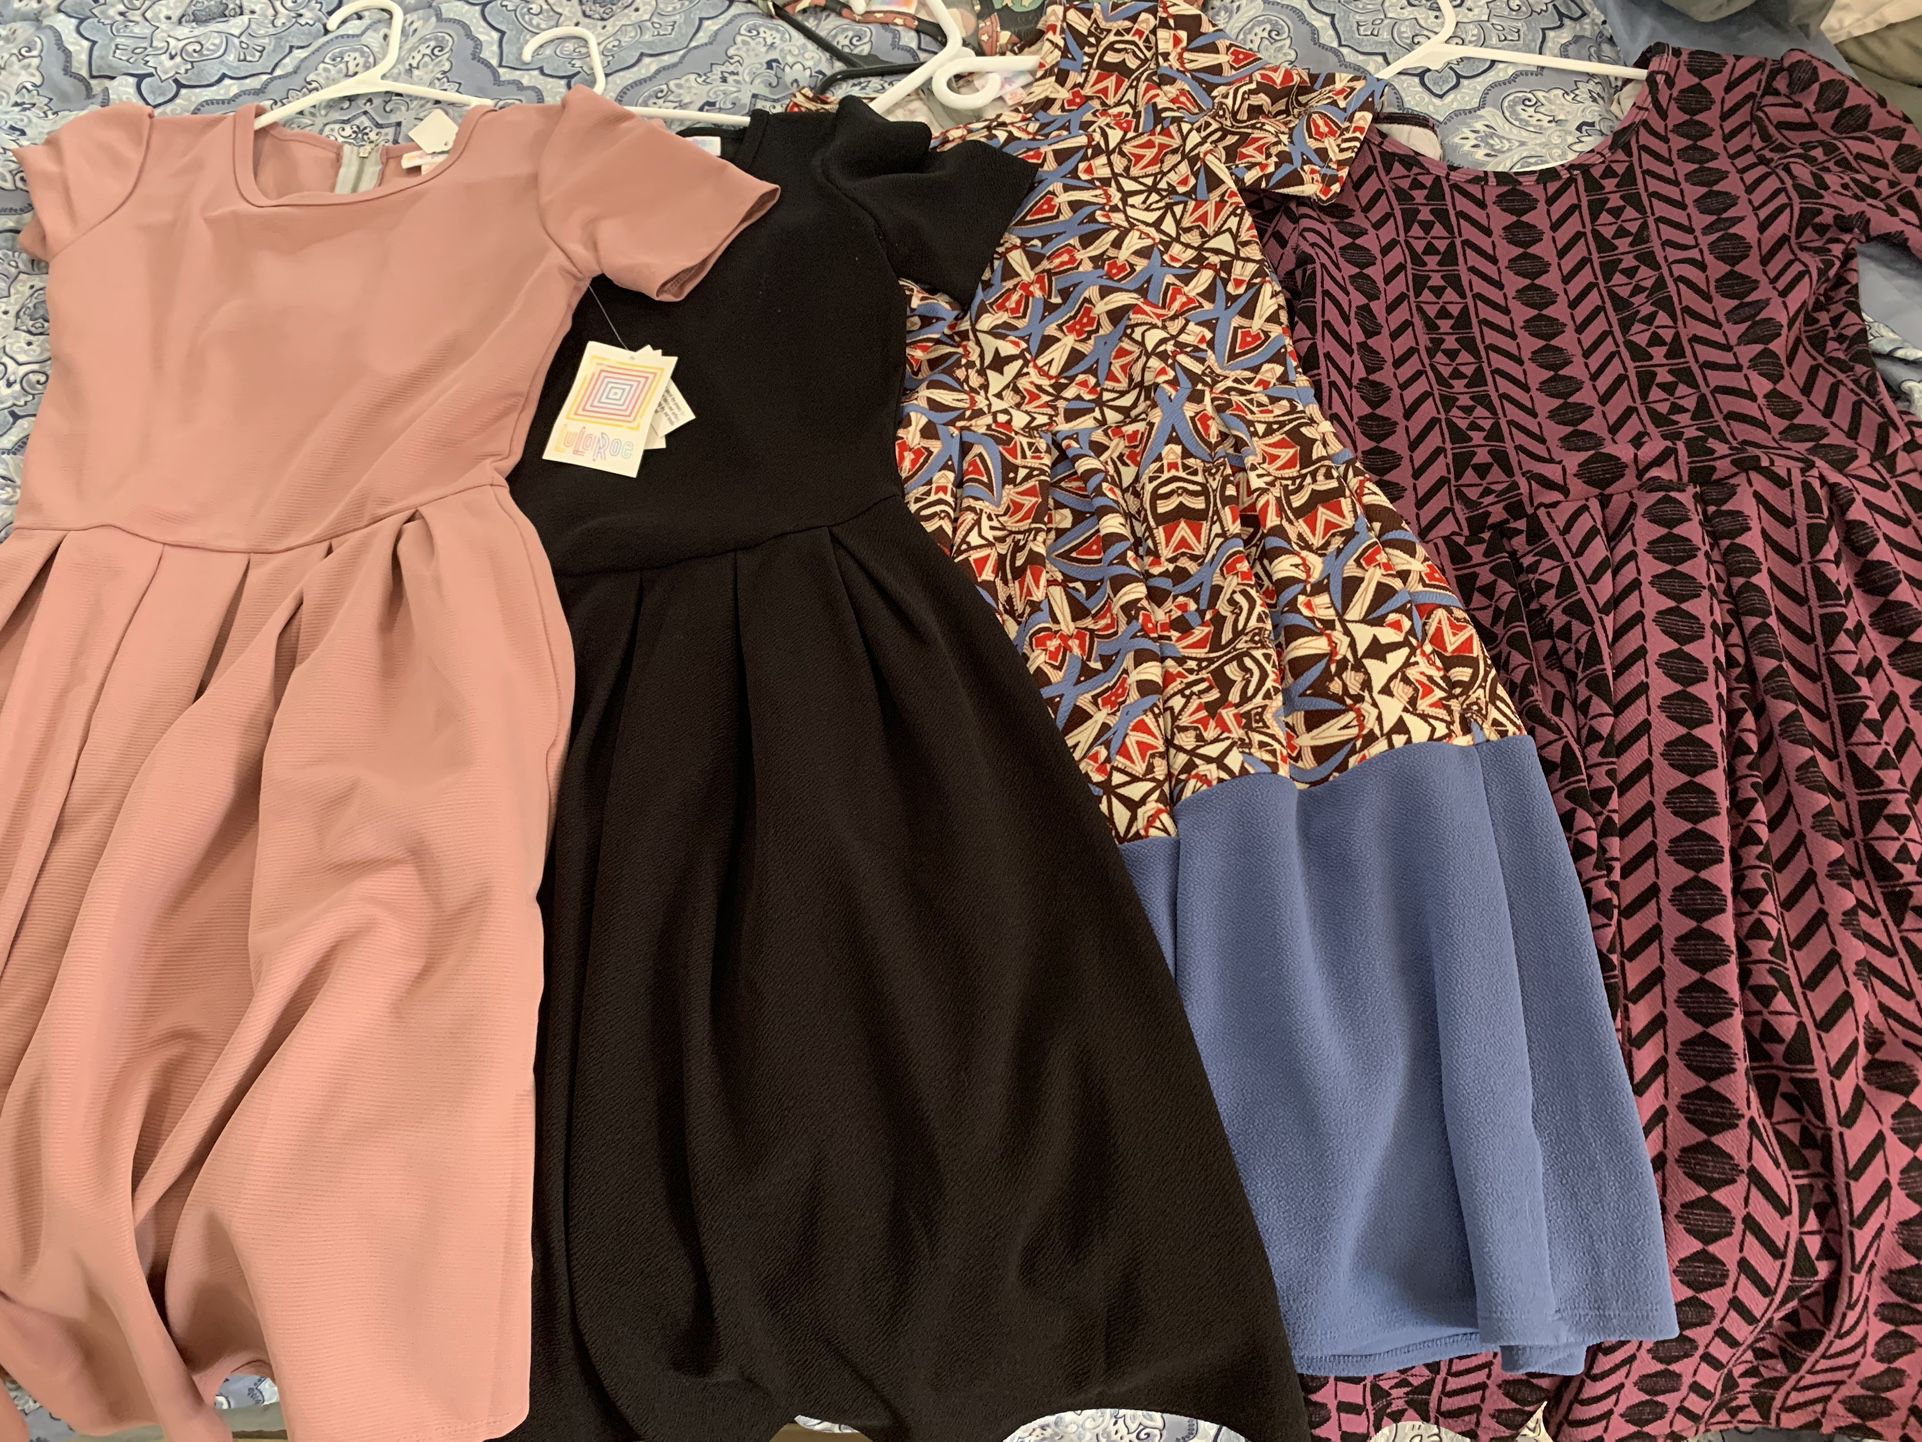 Lularoe Nicole dress size extra small xs $10 each coral springs 33071